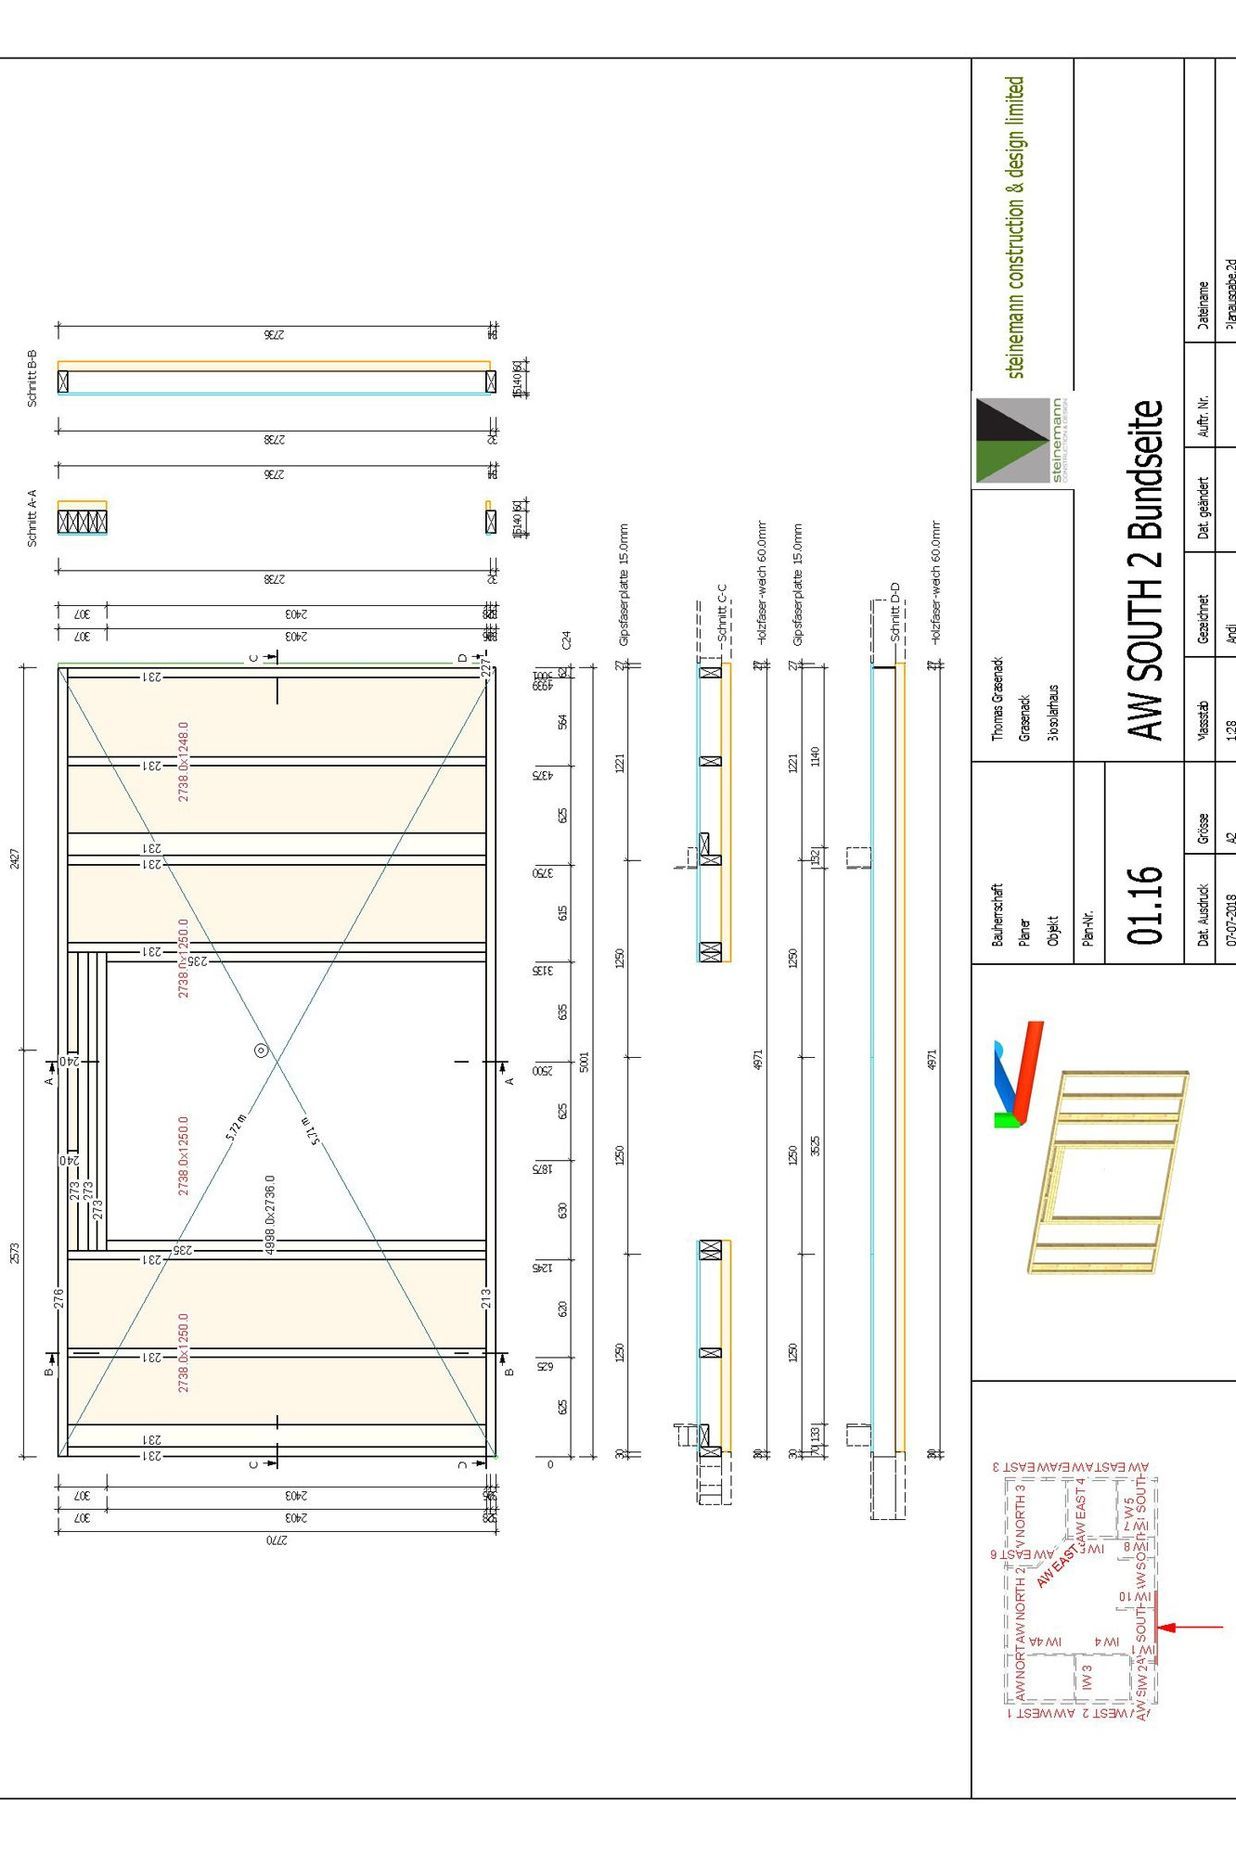 The 3D draft is converted into 2D plans, providing a detailed inventory and comprehensive quantity list for the prefabrication of all the different parts.